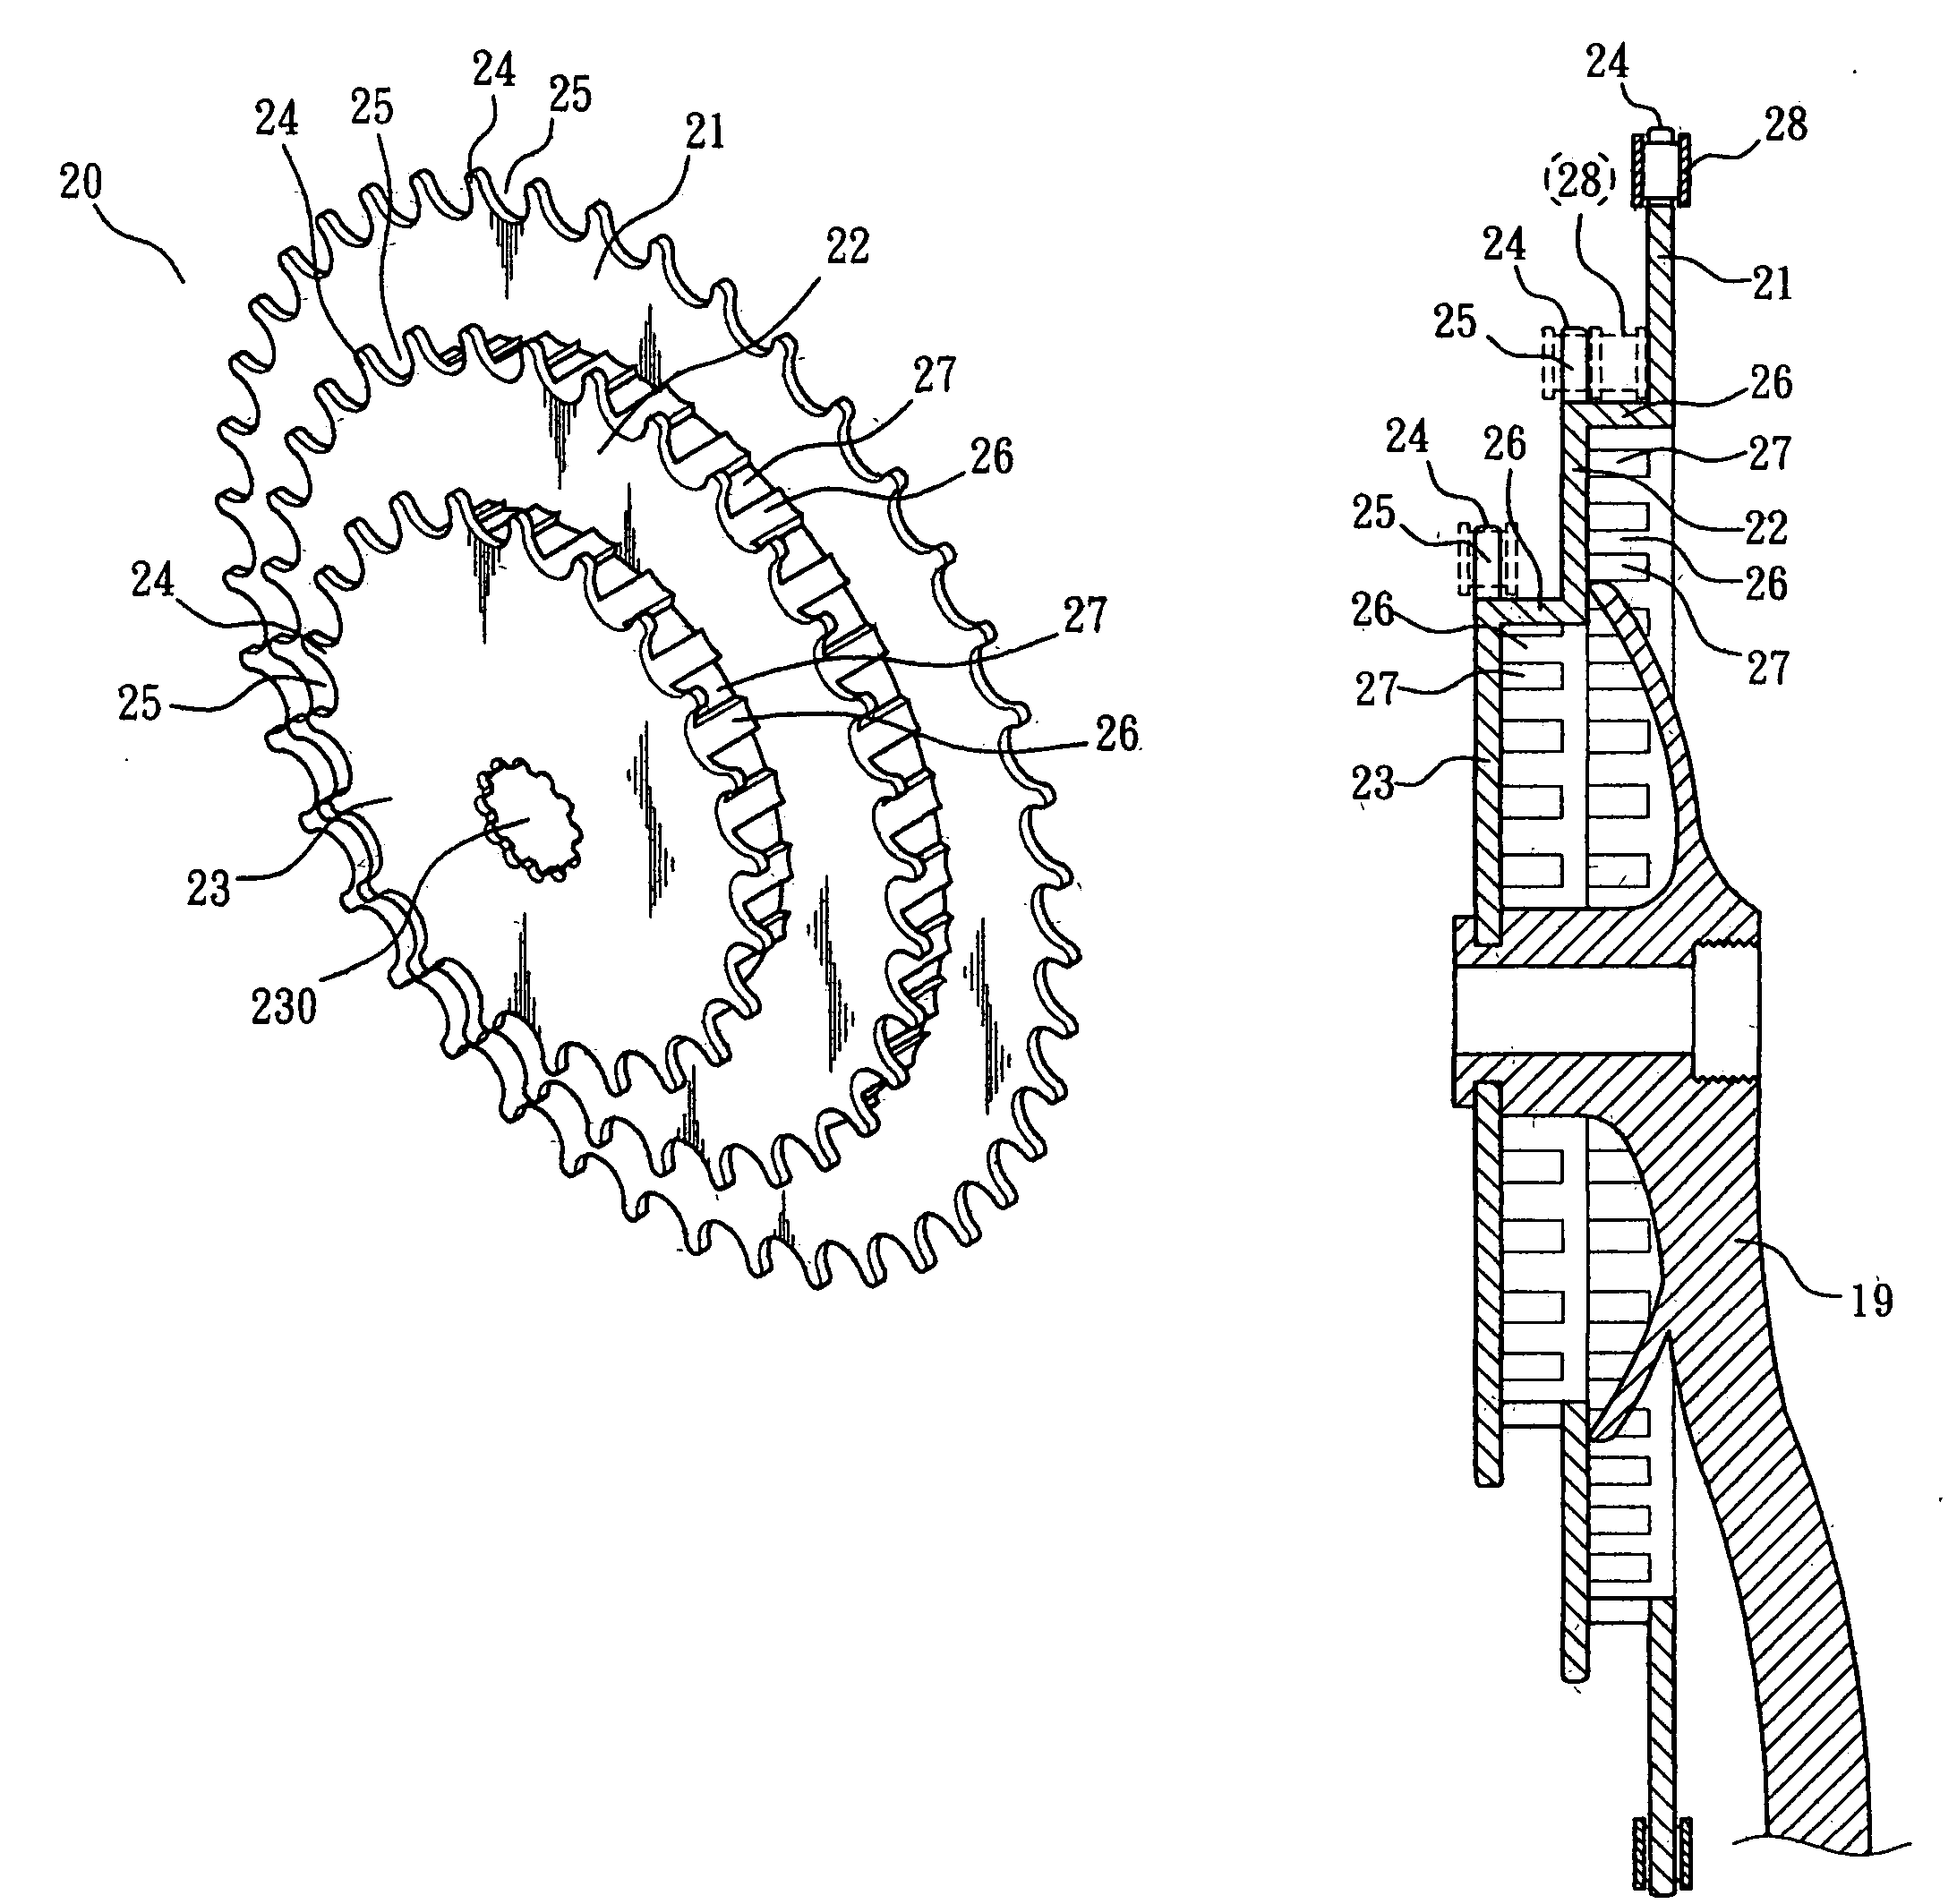 Integrally formed gear set with a plurality of gears